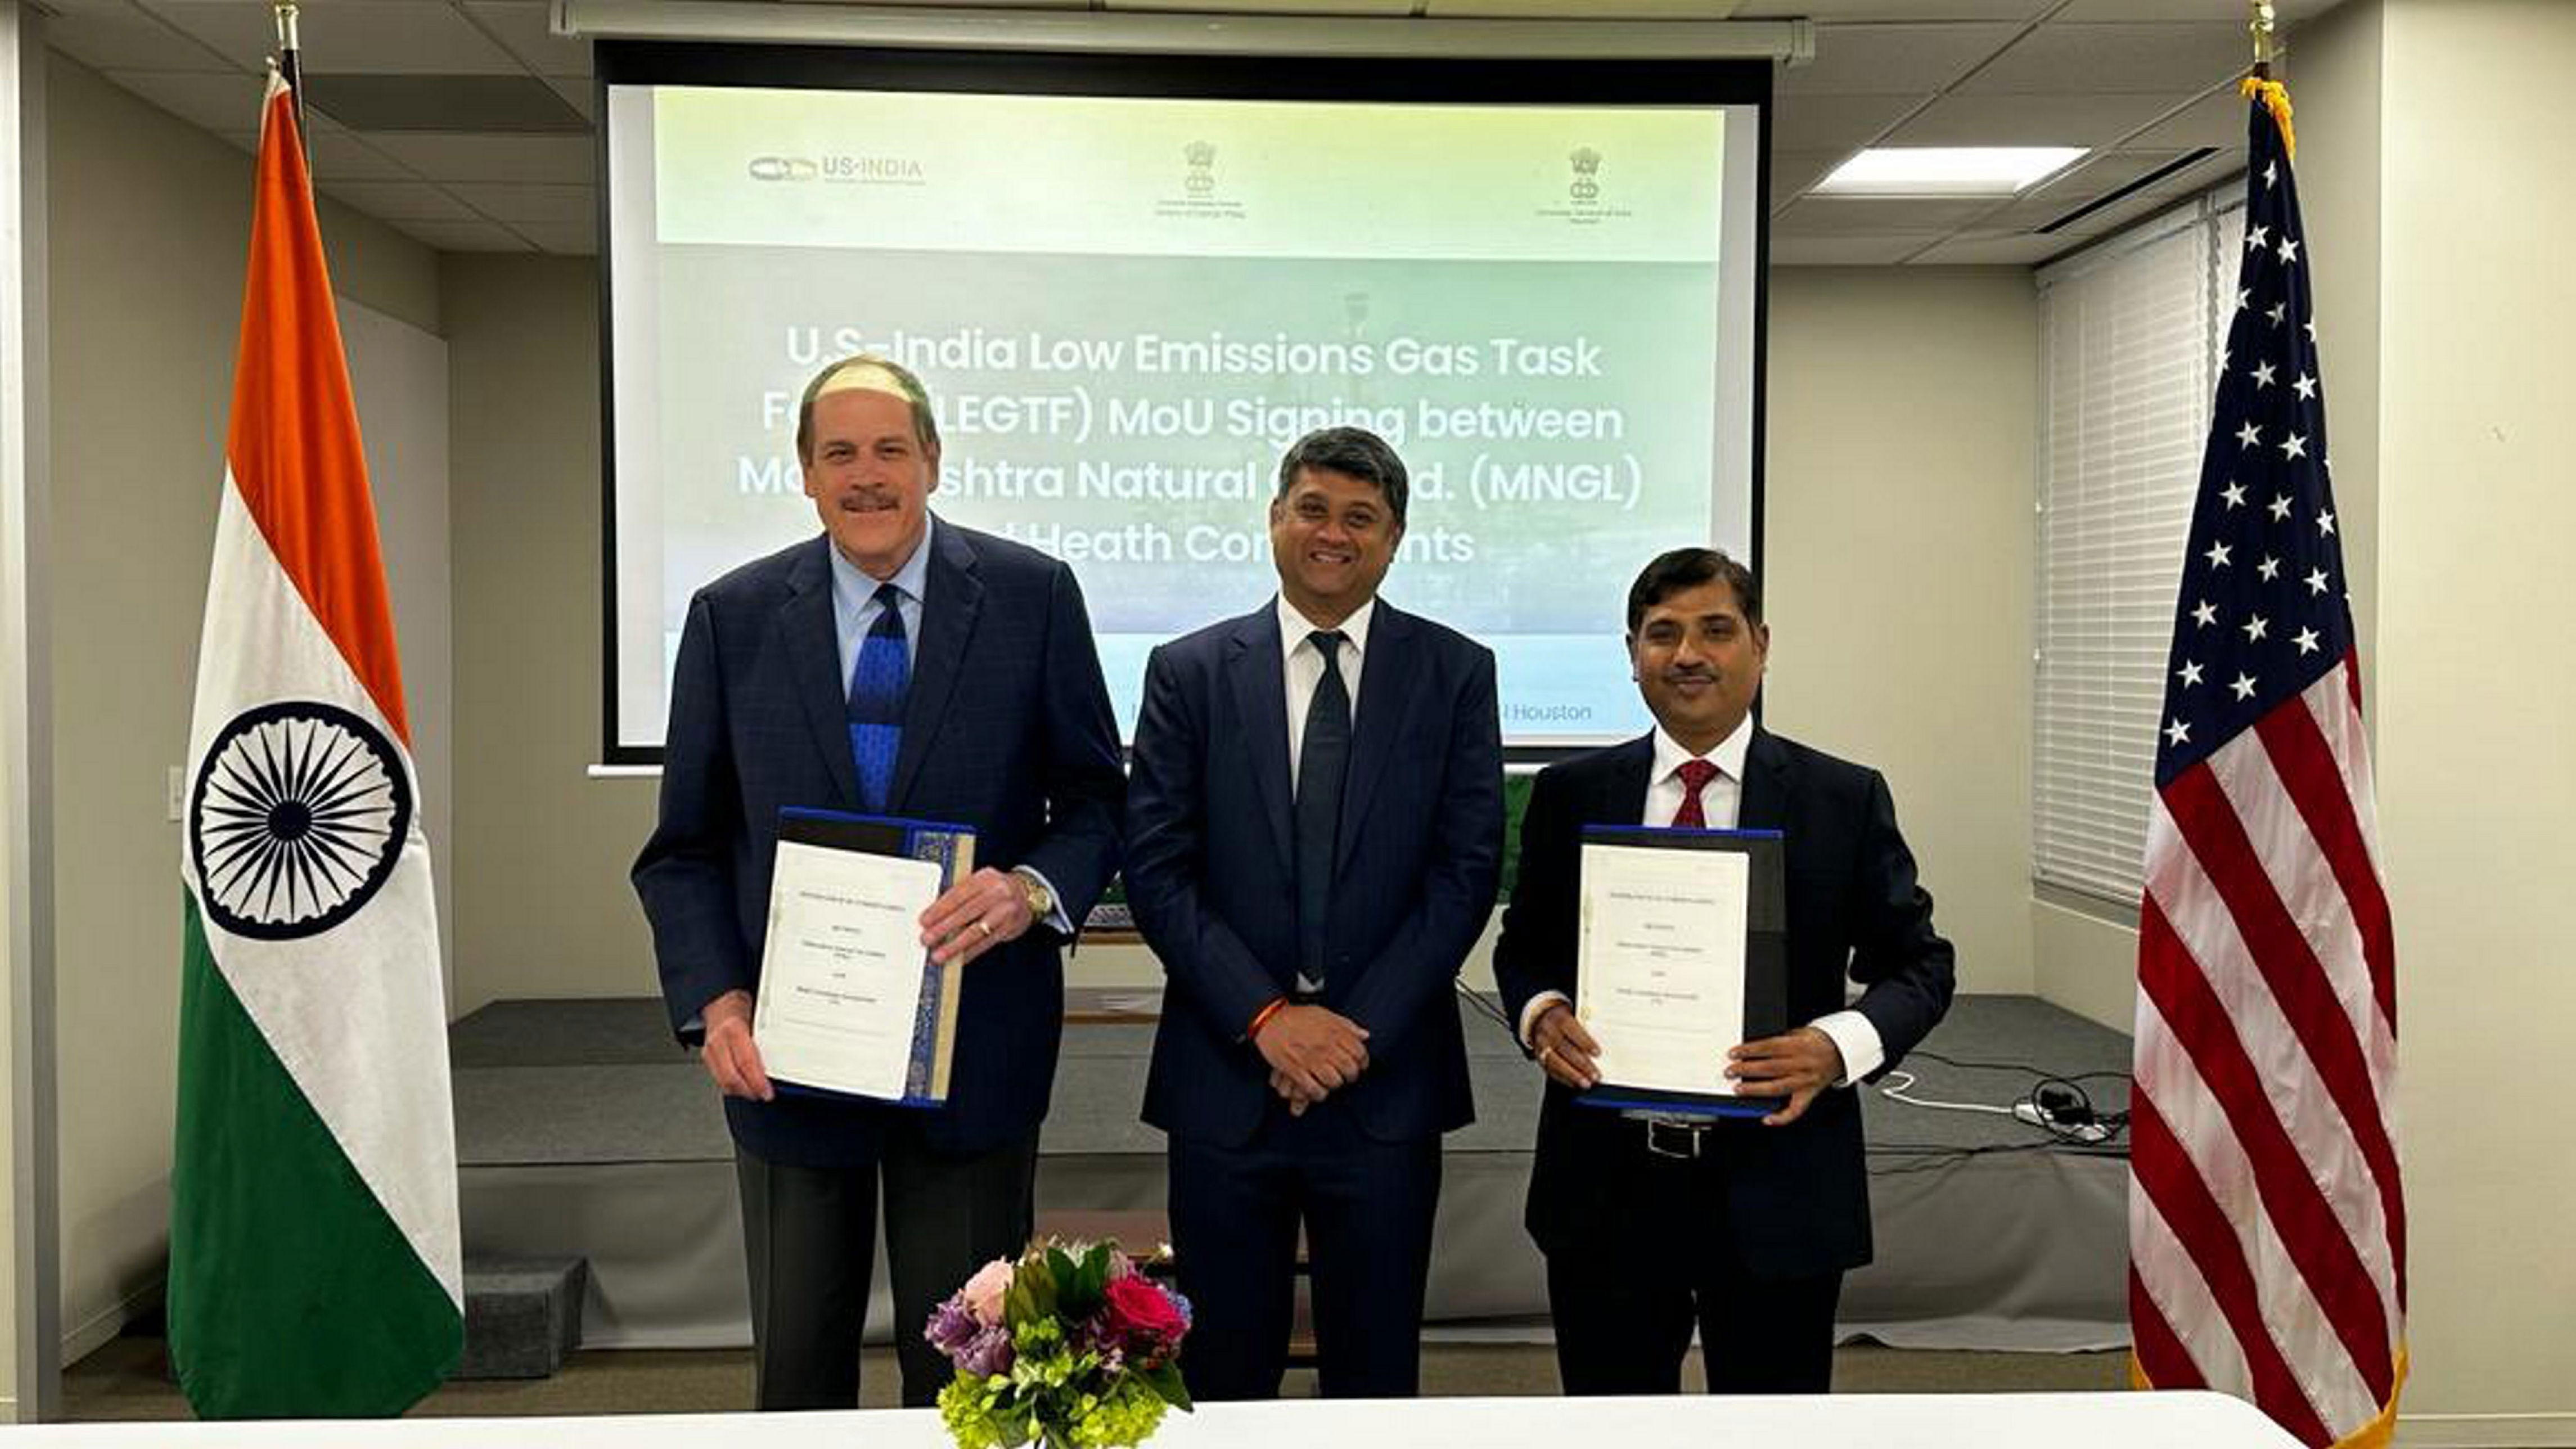 mngl inks tech collaboration deal with heath consultants for low-emission operations